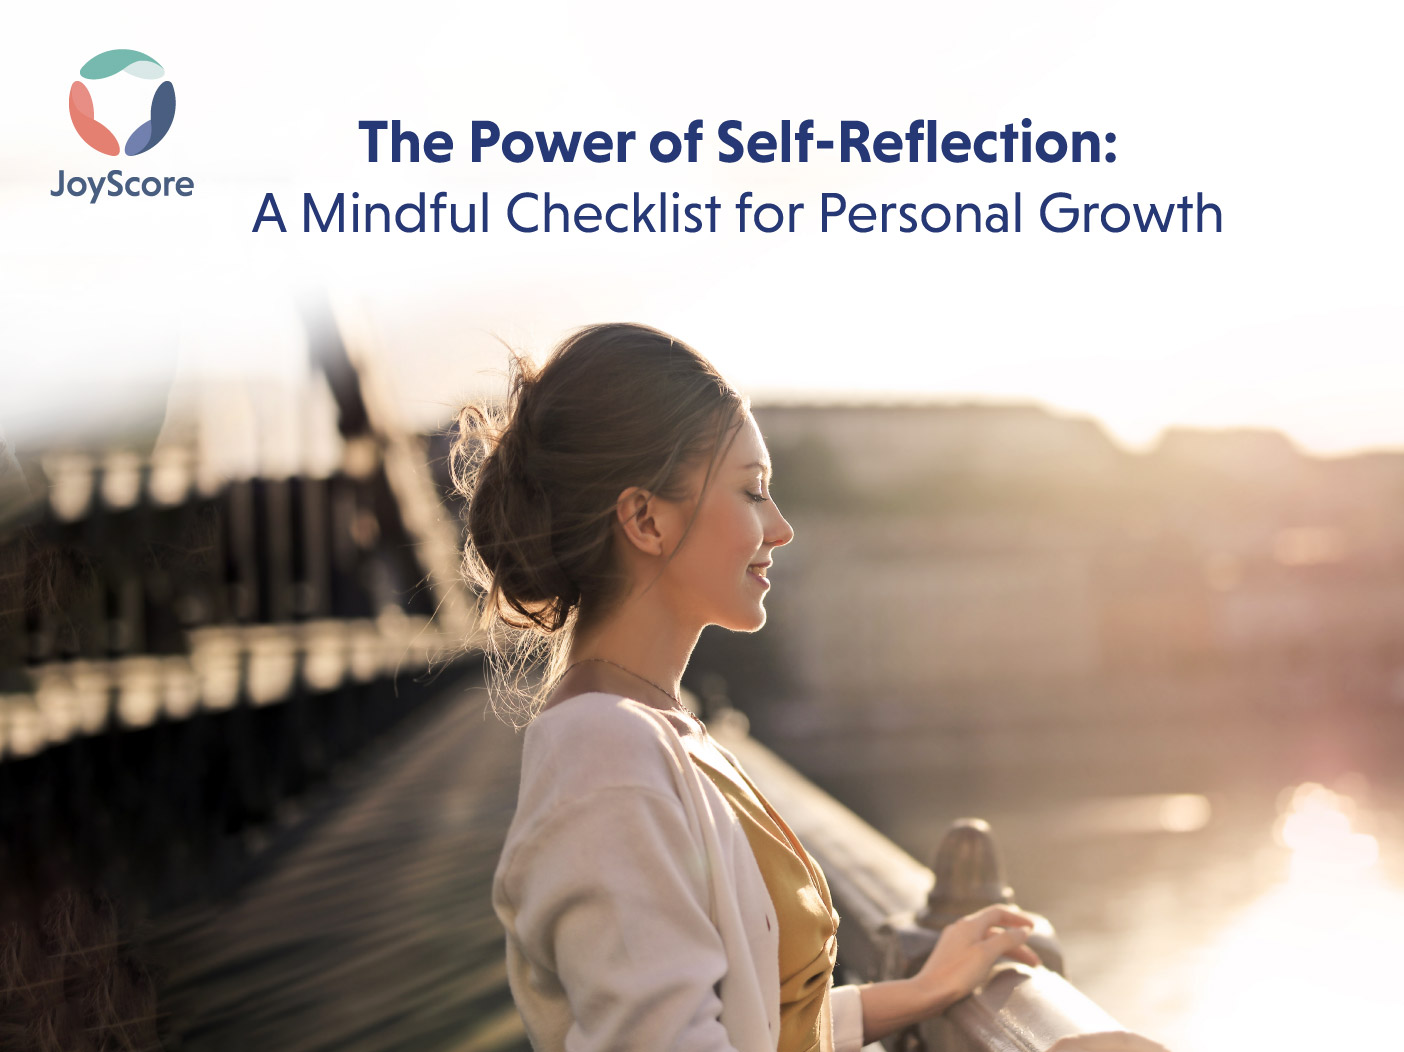 The Power of Self-Reflection: A Mindful Checklist for Personal Growth